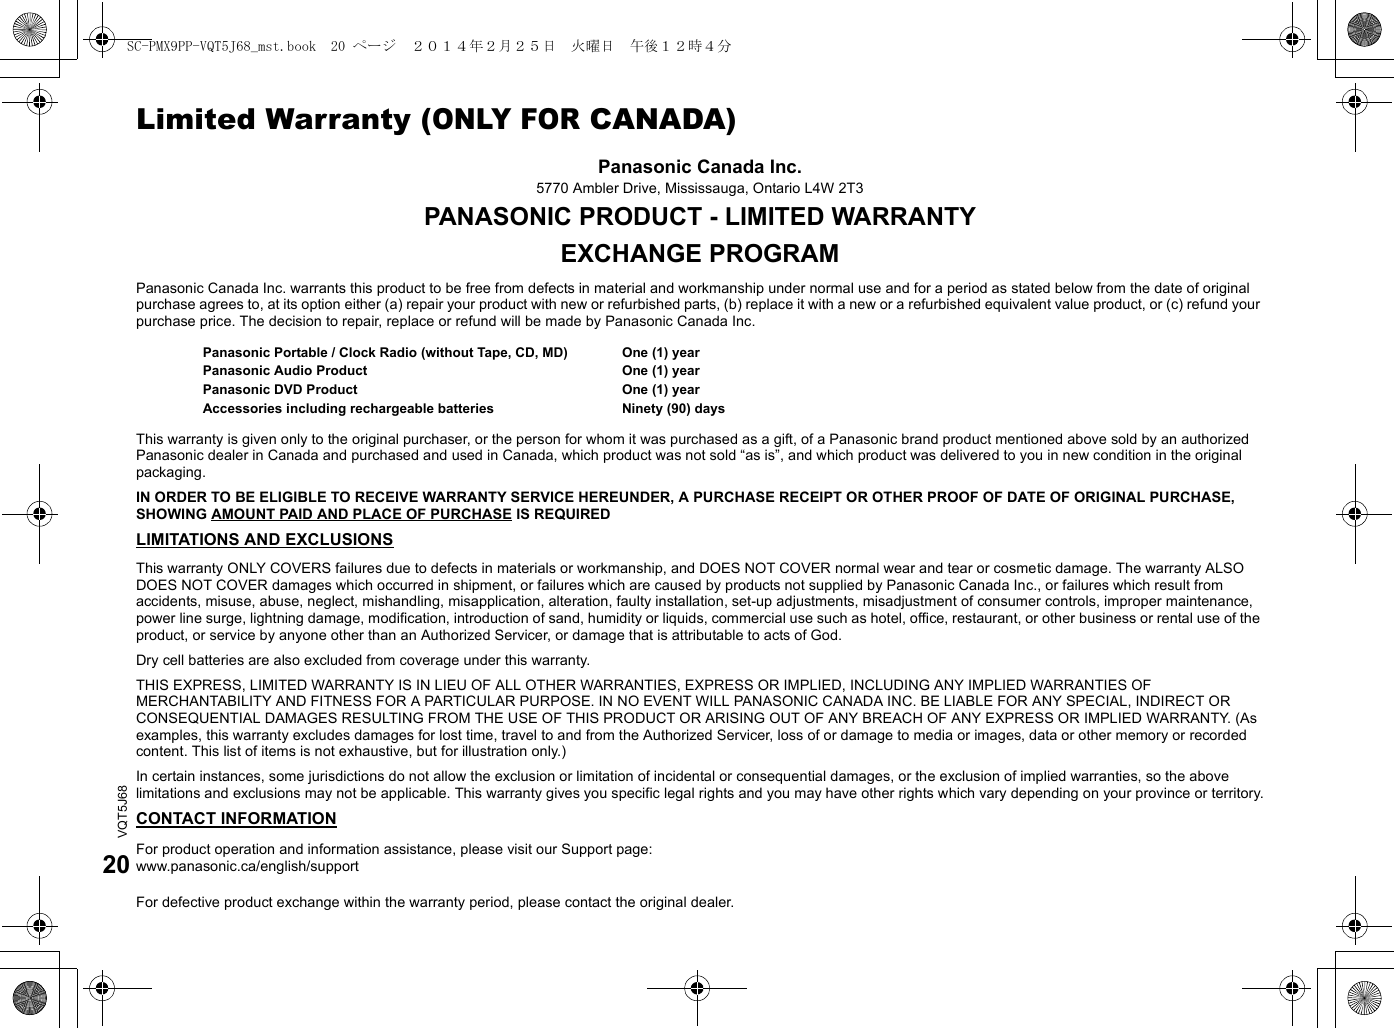 VQT5J6820Limited Warranty (ONLY FOR CANADA)Panasonic Canada Inc.5770 Ambler Drive, Mississauga, Ontario L4W 2T3PANASONIC PRODUCT - LIMITED WARRANTYEXCHANGE PROGRAMPanasonic Canada Inc. warrants this product to be free from defects in material and workmanship under normal use and for a period as stated below from the date of original purchase agrees to, at its option either (a) repair your product with new or refurbished parts, (b) replace it with a new or a refurbished equivalent value product, or (c) refund your purchase price. The decision to repair, replace or refund will be made by Panasonic Canada Inc.This warranty is given only to the original purchaser, or the person for whom it was purchased as a gift, of a Panasonic brand product mentioned above sold by an authorized Panasonic dealer in Canada and purchased and used in Canada, which product was not sold “as is”, and which product was delivered to you in new condition in the original packaging.IN ORDER TO BE ELIGIBLE TO RECEIVE WARRANTY SERVICE HEREUNDER, A PURCHASE RECEIPT OR OTHER PROOF OF DATE OF ORIGINAL PURCHASE, SHOWING AMOUNT PAID AND PLACE OF PURCHASE IS REQUIREDLIMITATIONS AND EXCLUSIONSThis warranty ONLY COVERS failures due to defects in materials or workmanship, and DOES NOT COVER normal wear and tear or cosmetic damage. The warranty ALSO DOES NOT COVER damages which occurred in shipment, or failures which are caused by products not supplied by Panasonic Canada Inc., or failures which result from accidents, misuse, abuse, neglect, mishandling, misapplication, alteration, faulty installation, set-up adjustments, misadjustment of consumer controls, improper maintenance, power line surge, lightning damage, modification, introduction of sand, humidity or liquids, commercial use such as hotel, office, restaurant, or other business or rental use of the product, or service by anyone other than an Authorized Servicer, or damage that is attributable to acts of God.Dry cell batteries are also excluded from coverage under this warranty.THIS EXPRESS, LIMITED WARRANTY IS IN LIEU OF ALL OTHER WARRANTIES, EXPRESS OR IMPLIED, INCLUDING ANY IMPLIED WARRANTIES OF MERCHANTABILITY AND FITNESS FOR A PARTICULAR PURPOSE. IN NO EVENT WILL PANASONIC CANADA INC. BE LIABLE FOR ANY SPECIAL, INDIRECT OR CONSEQUENTIAL DAMAGES RESULTING FROM THE USE OF THIS PRODUCT OR ARISING OUT OF ANY BREACH OF ANY EXPRESS OR IMPLIED WARRANTY. (As examples, this warranty excludes damages for lost time, travel to and from the Authorized Servicer, loss of or damage to media or images, data or other memory or recorded content. This list of items is not exhaustive, but for illustration only.)In certain instances, some jurisdictions do not allow the exclusion or limitation of incidental or consequential damages, or the exclusion of implied warranties, so the above limitations and exclusions may not be applicable. This warranty gives you specific legal rights and you may have other rights which vary depending on your province or territory.CONTACT INFORMATIONPanasonic Portable / Clock Radio (without Tape, CD, MD)Panasonic Audio ProductPanasonic DVD ProductAccessories including rechargeable batteriesOne (1) yearOne (1) yearOne (1) yearNinety (90) daysFor product operation and information assistance, please visit our Support page:www.panasonic.ca/english/supportFor defective product exchange within the warranty period, please contact the original dealer.SC-PMX9PP-VQT5J68_mst.book  20 ページ  ２０１４年２月２５日　火曜日　午後１２時４分